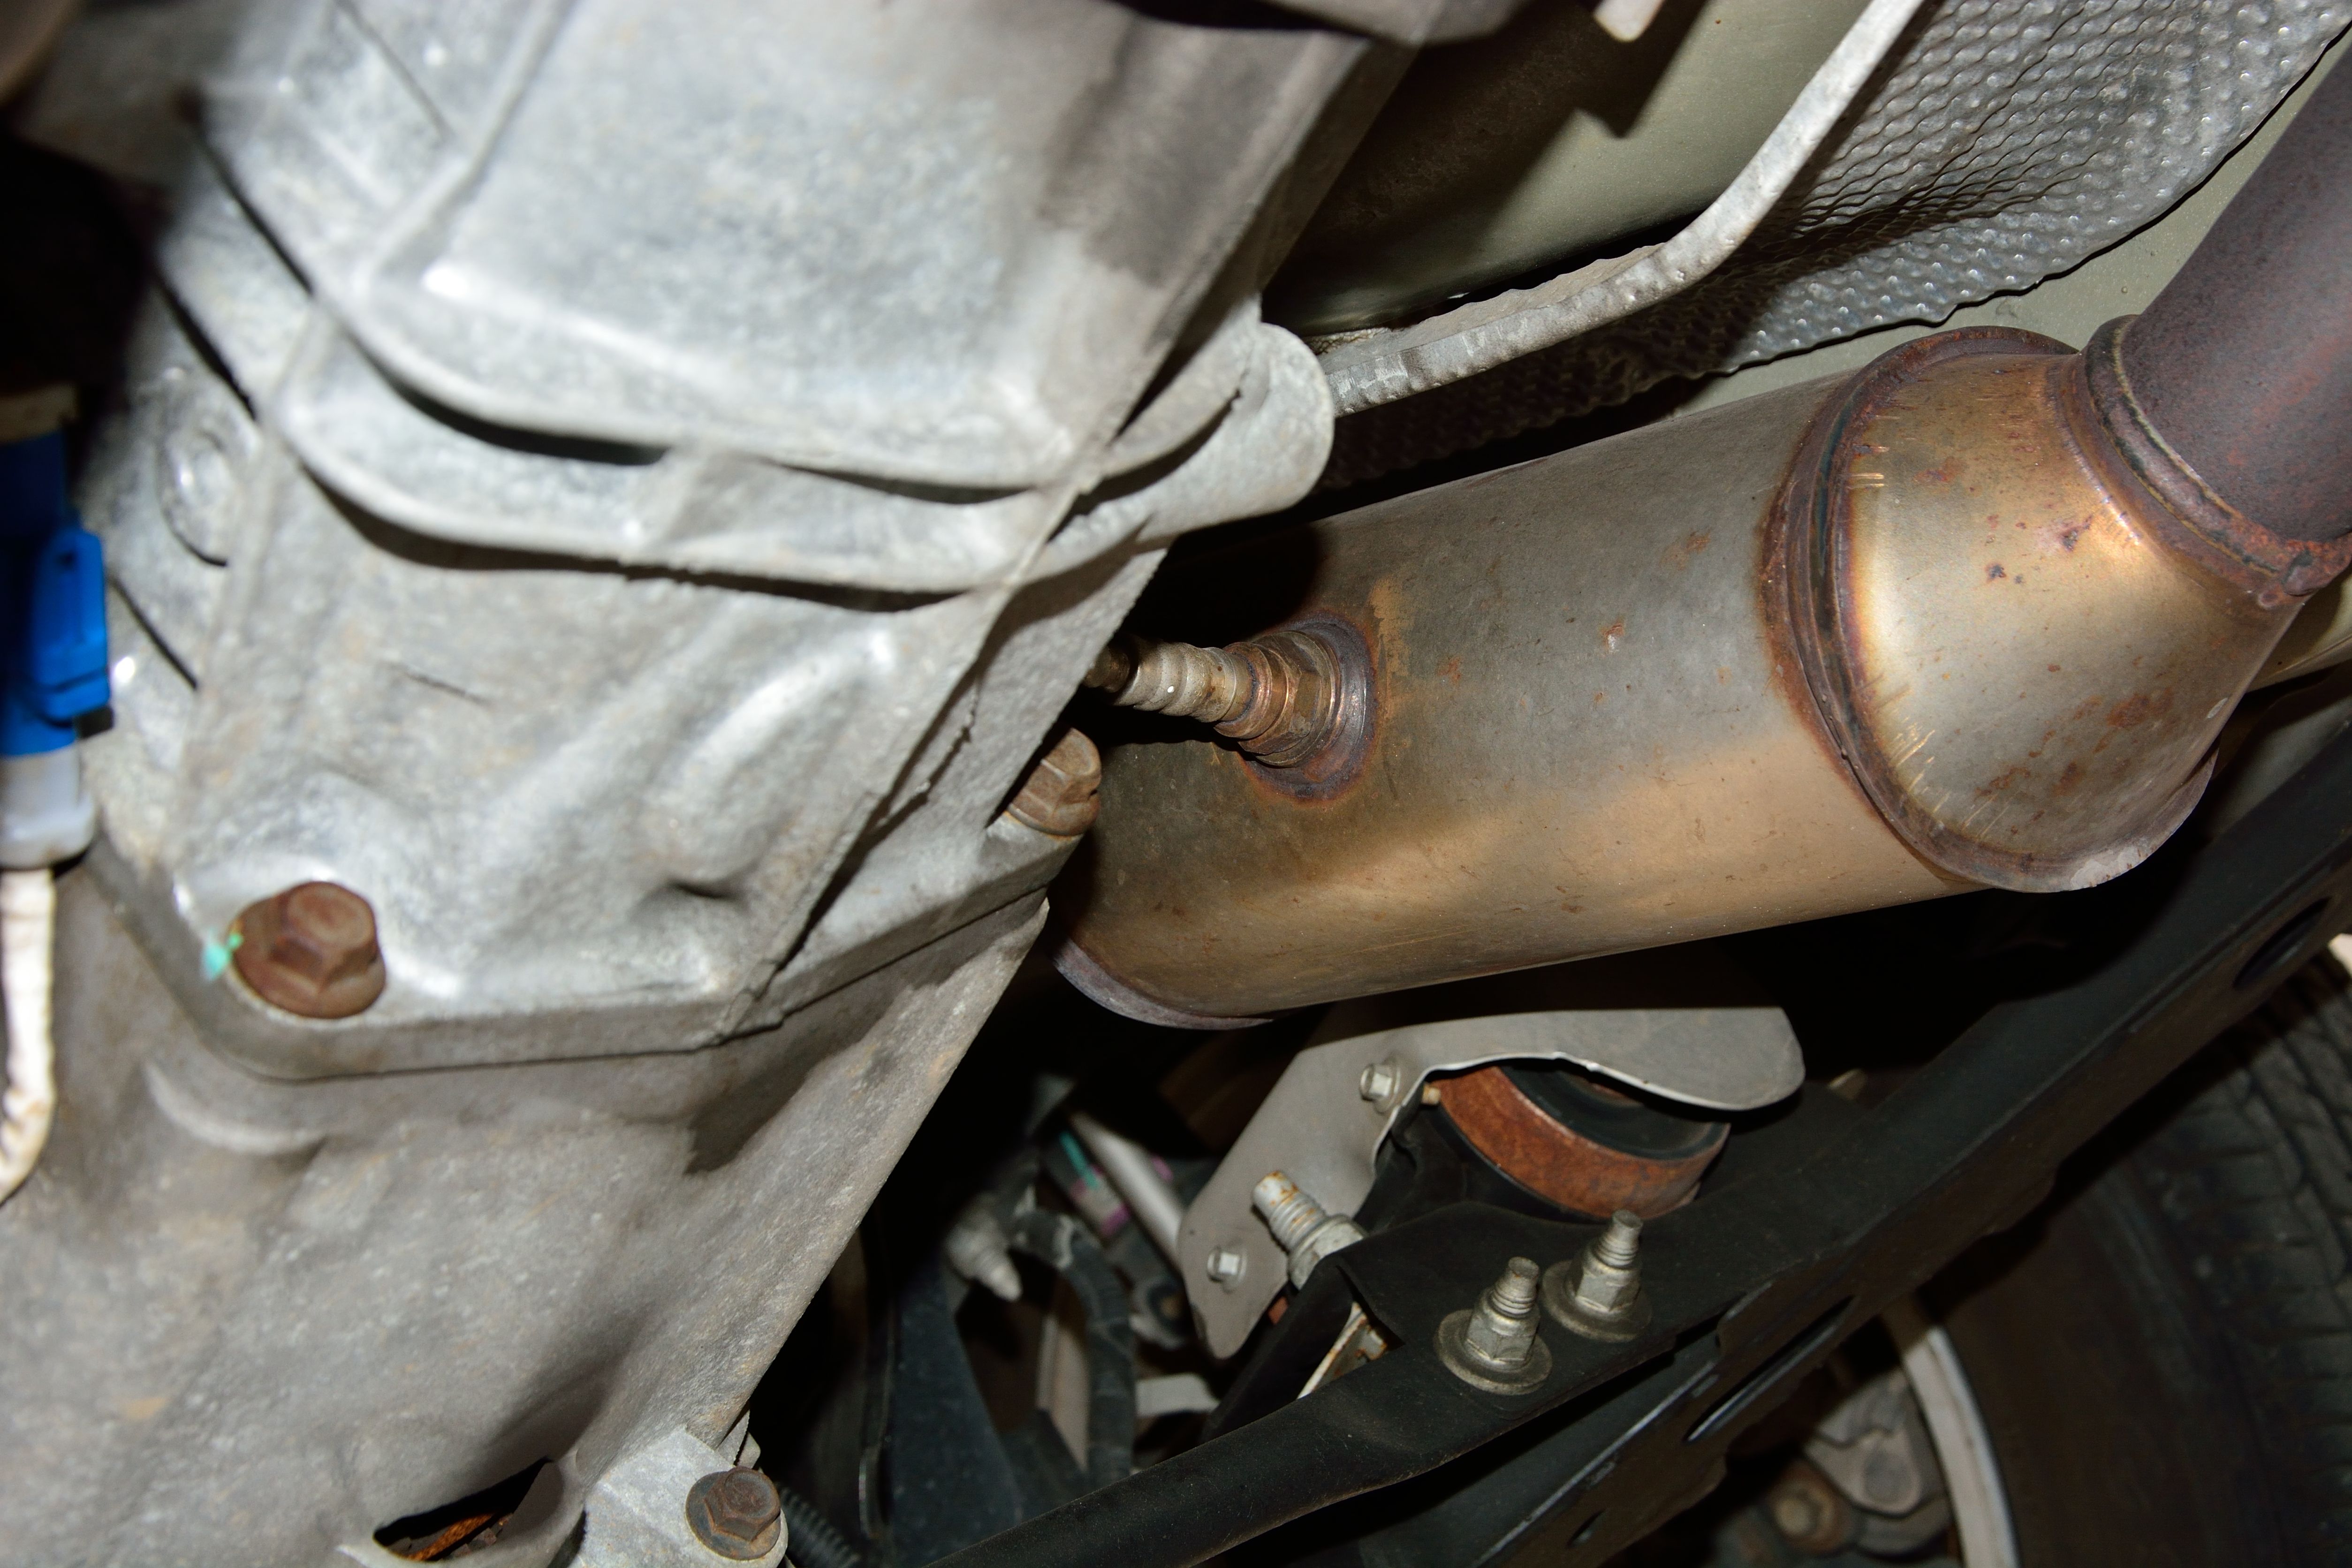 With Catalytic Converter Theft Exploding, State Lawmakers React